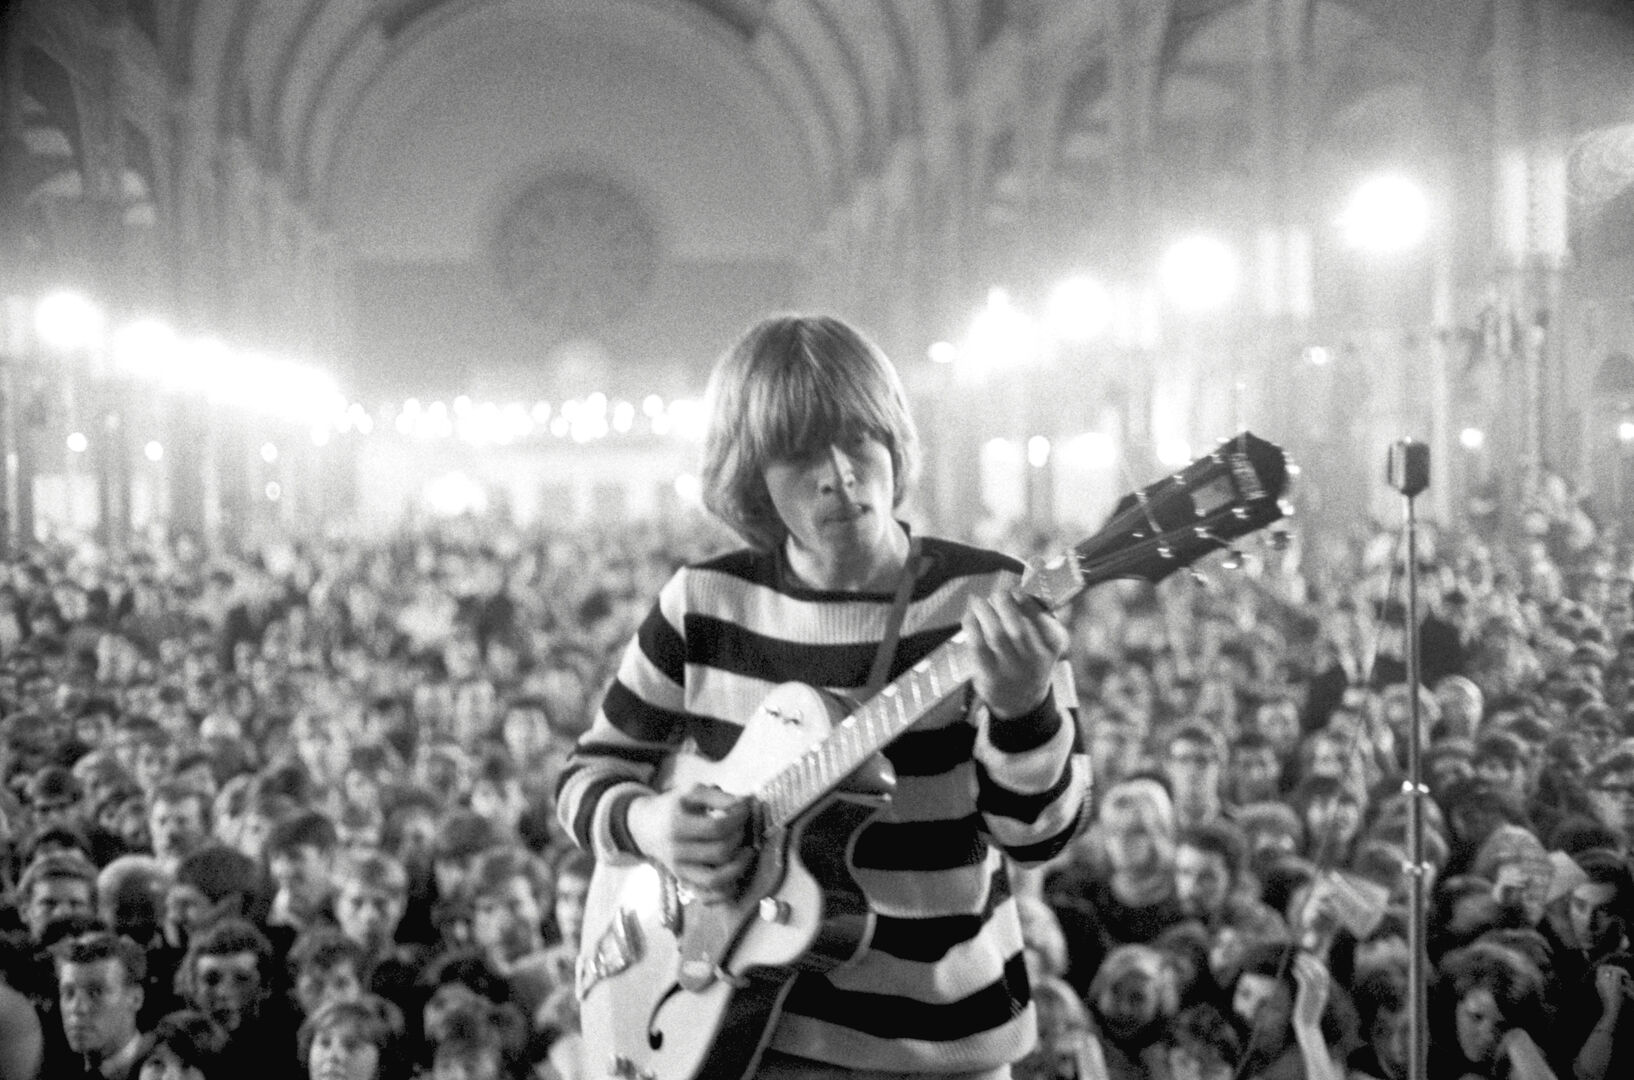 The-Stones-and-Brian-Jones_st_2_jpg_sd-high_Copyright-Getty-Images-Photo-courtesy-of-Magnolia-Pictures